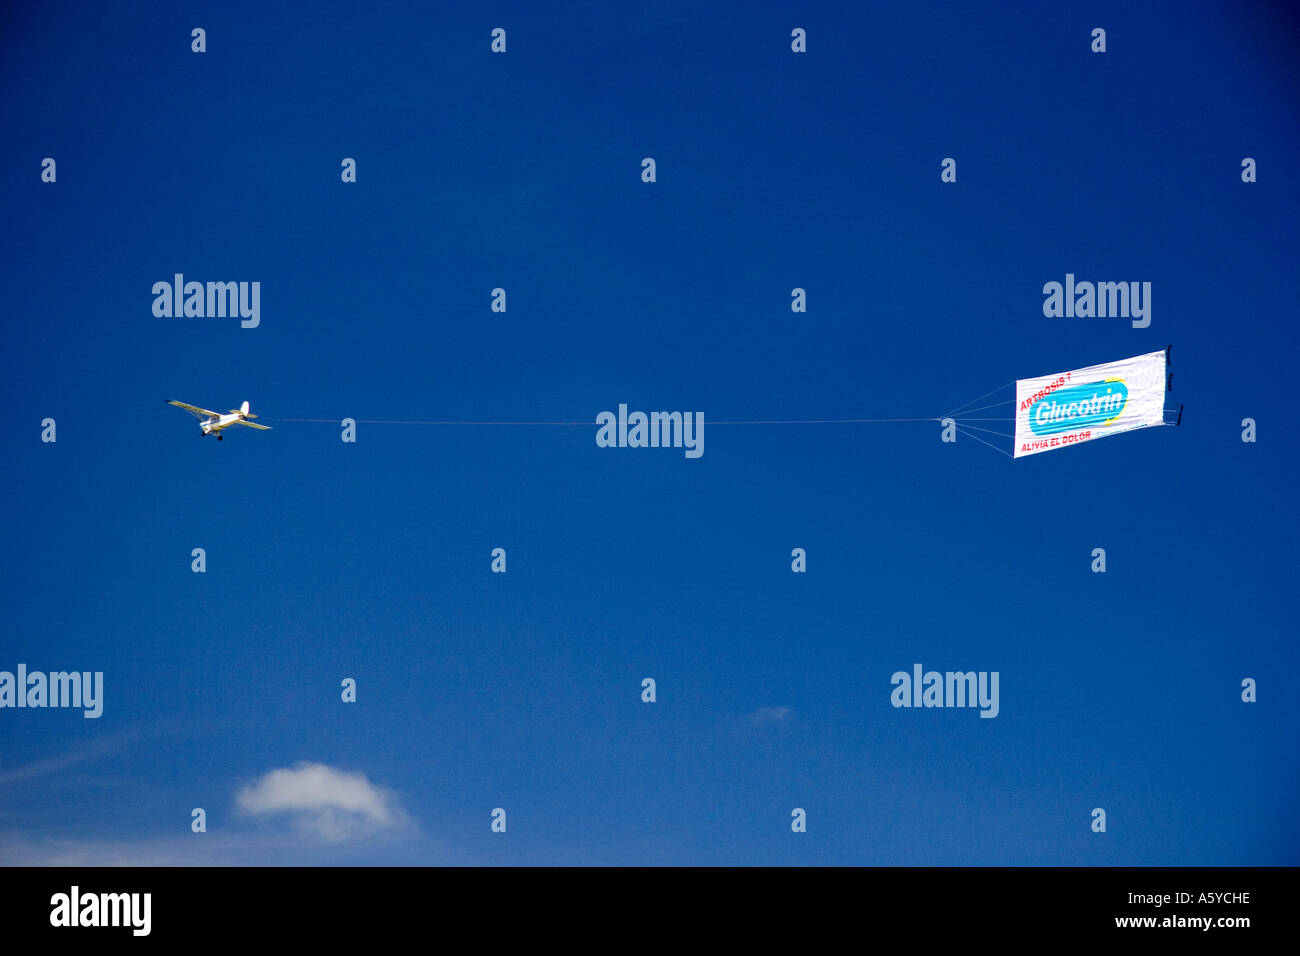 Airplane flying with advertisement in Argentina. Stock Photo